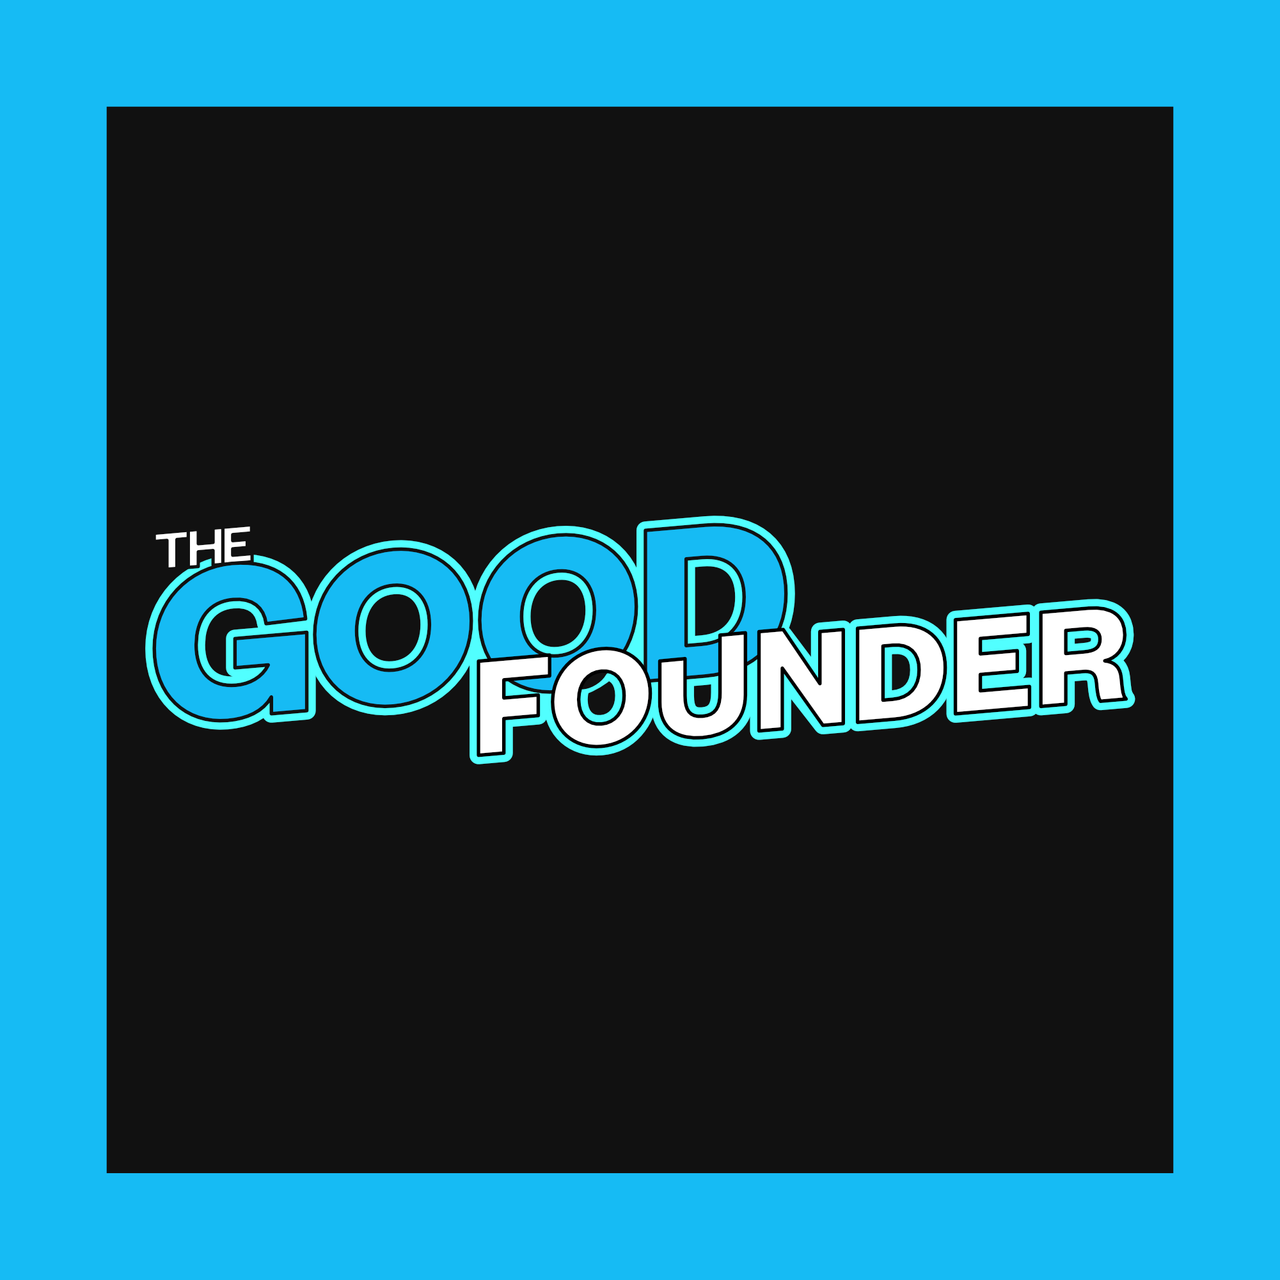 The Good Founder